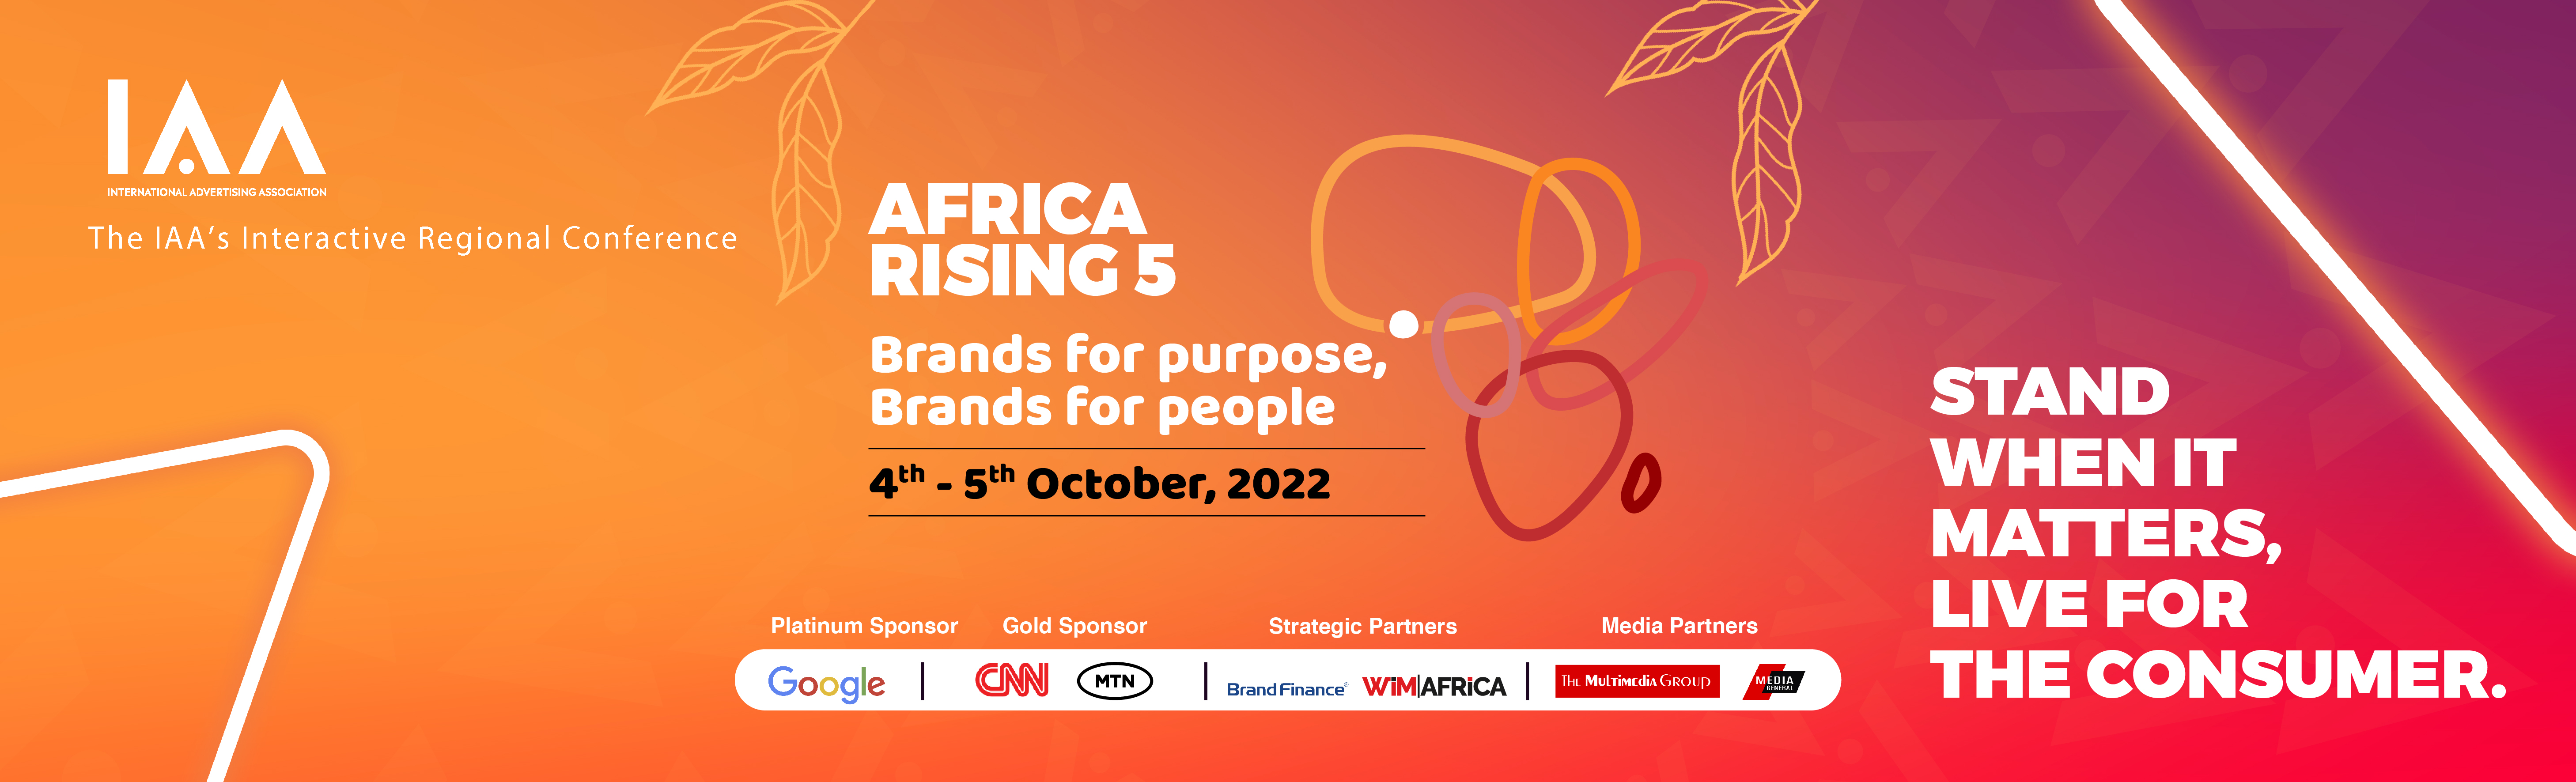 Women in Marketing Africa Partners with the IAA on Africa Rising 5 Conference